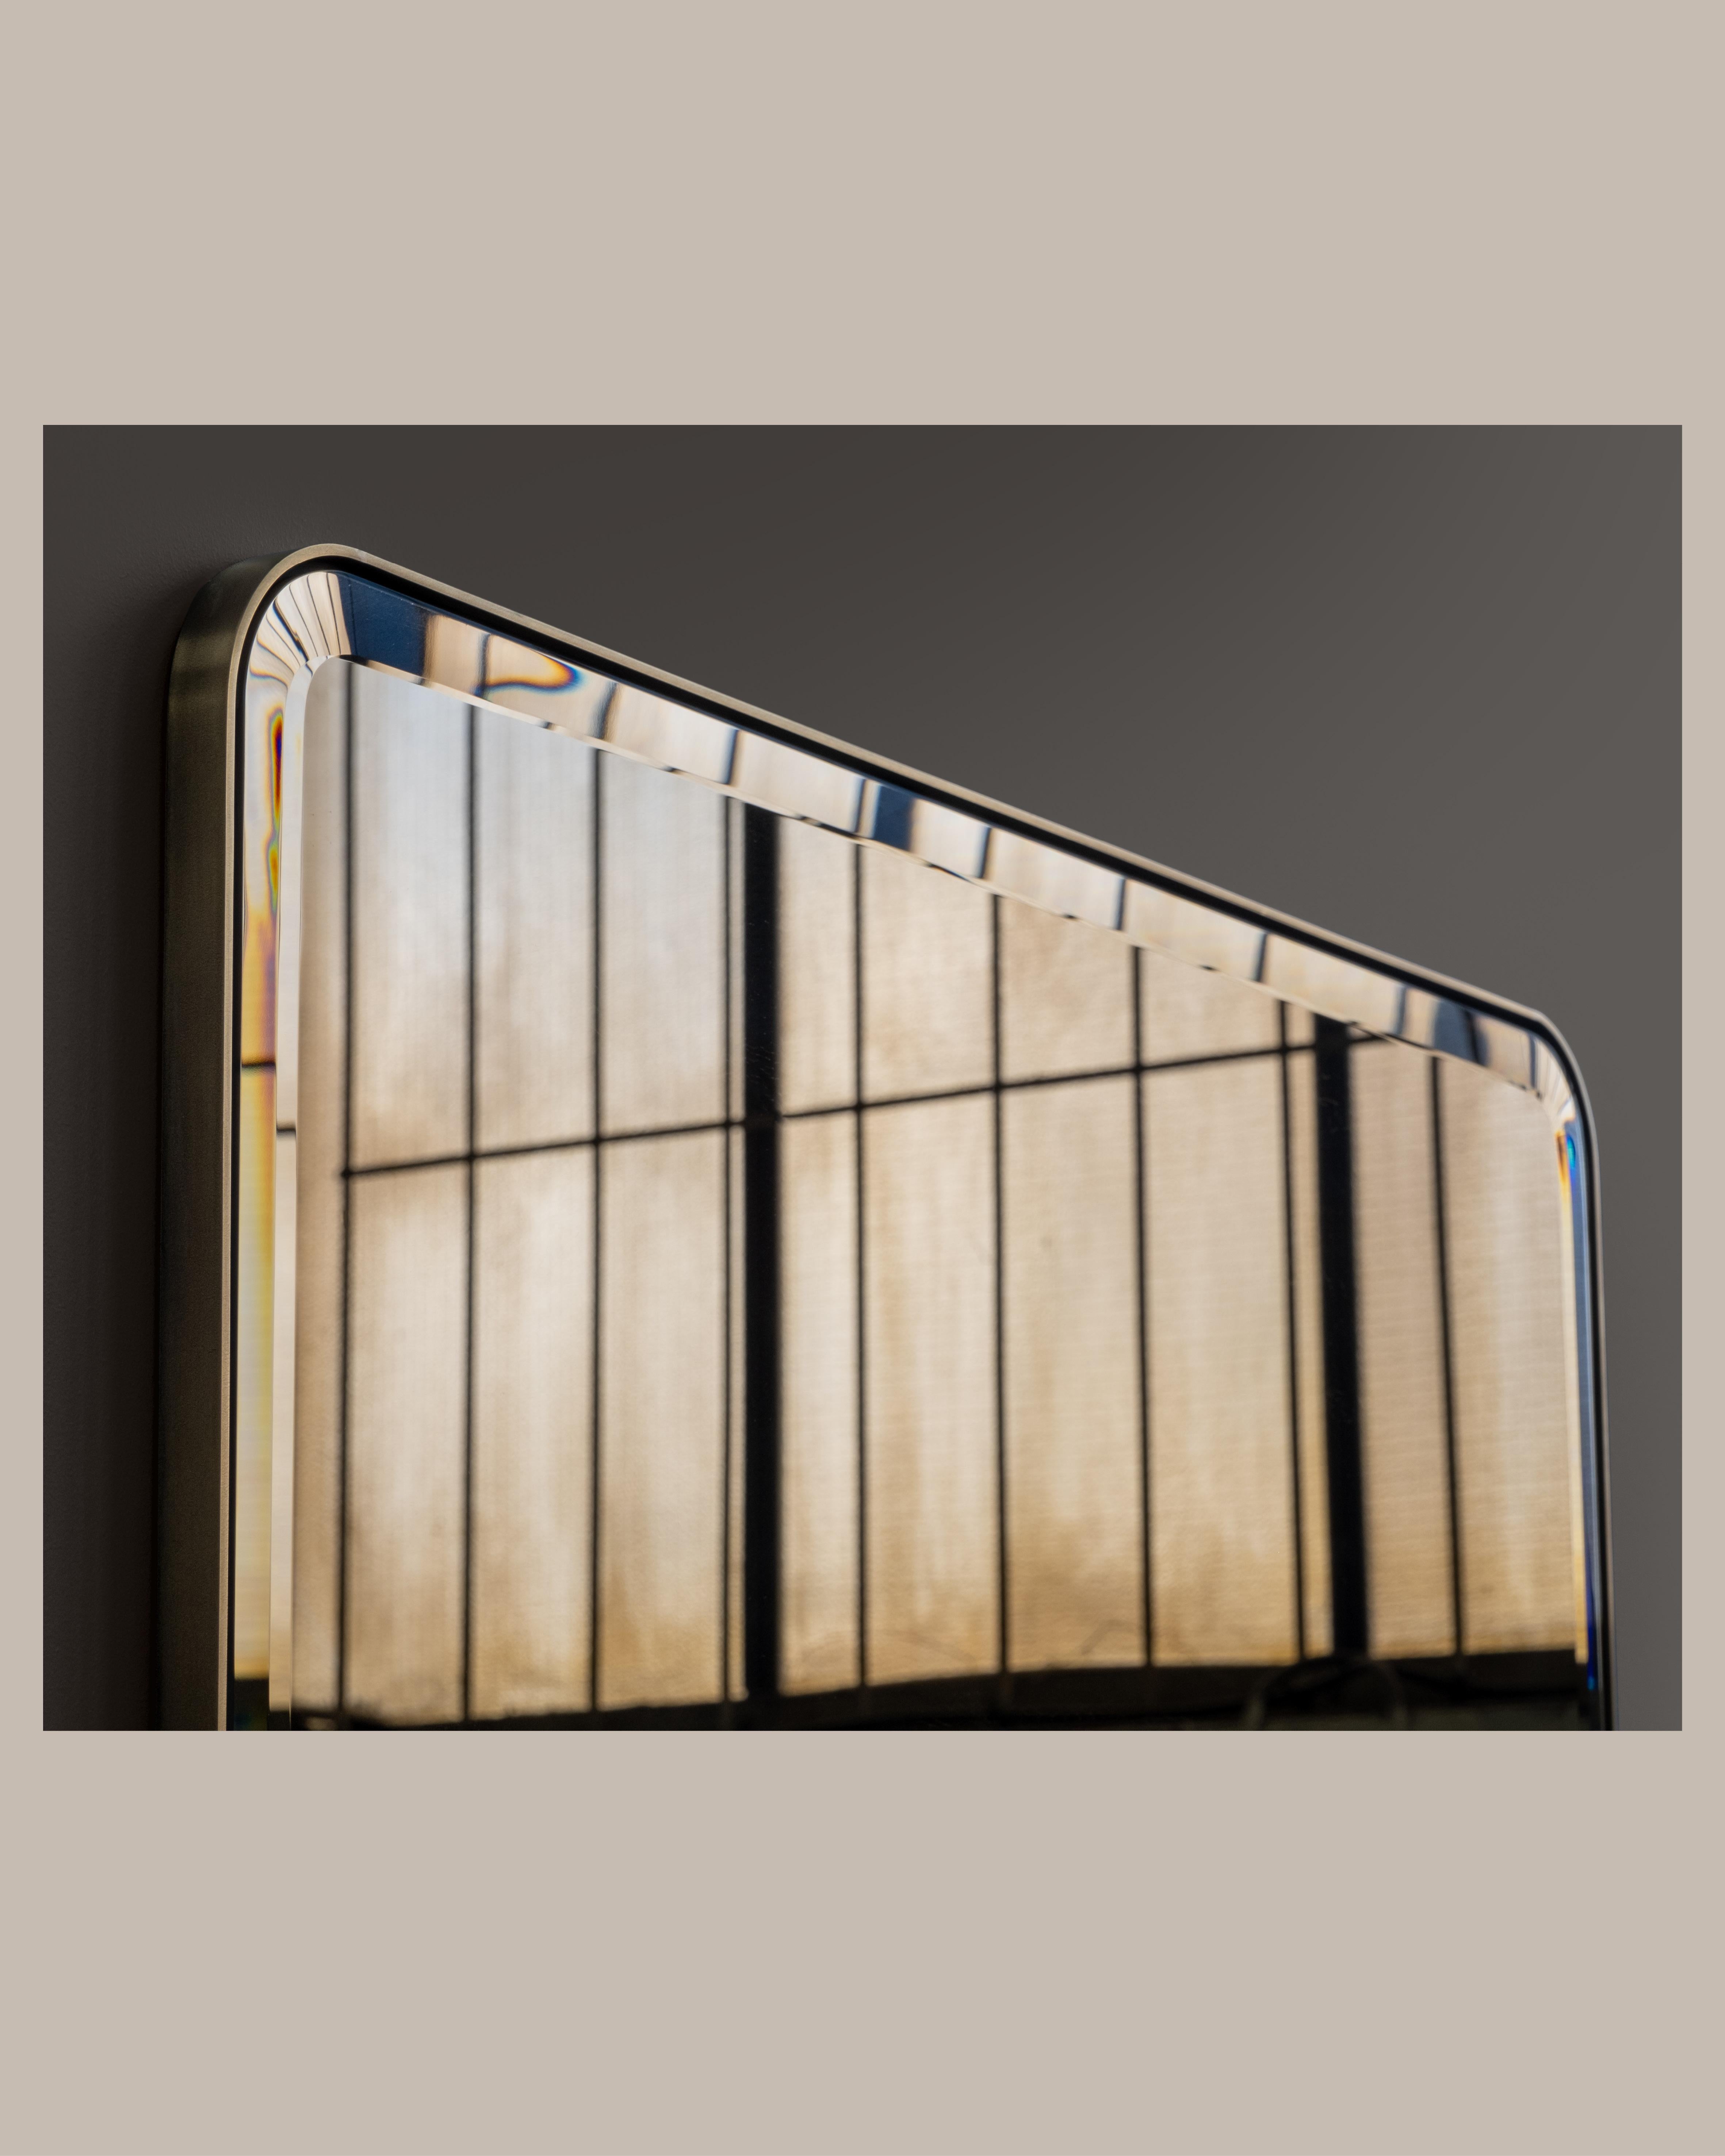 A wall mirror with bevelled glass mirror. Various metal, finish and mirror tint options are available. Hand crafted in the North to order.

Initial image shows a polished brass frame with bronze tinted mirror.